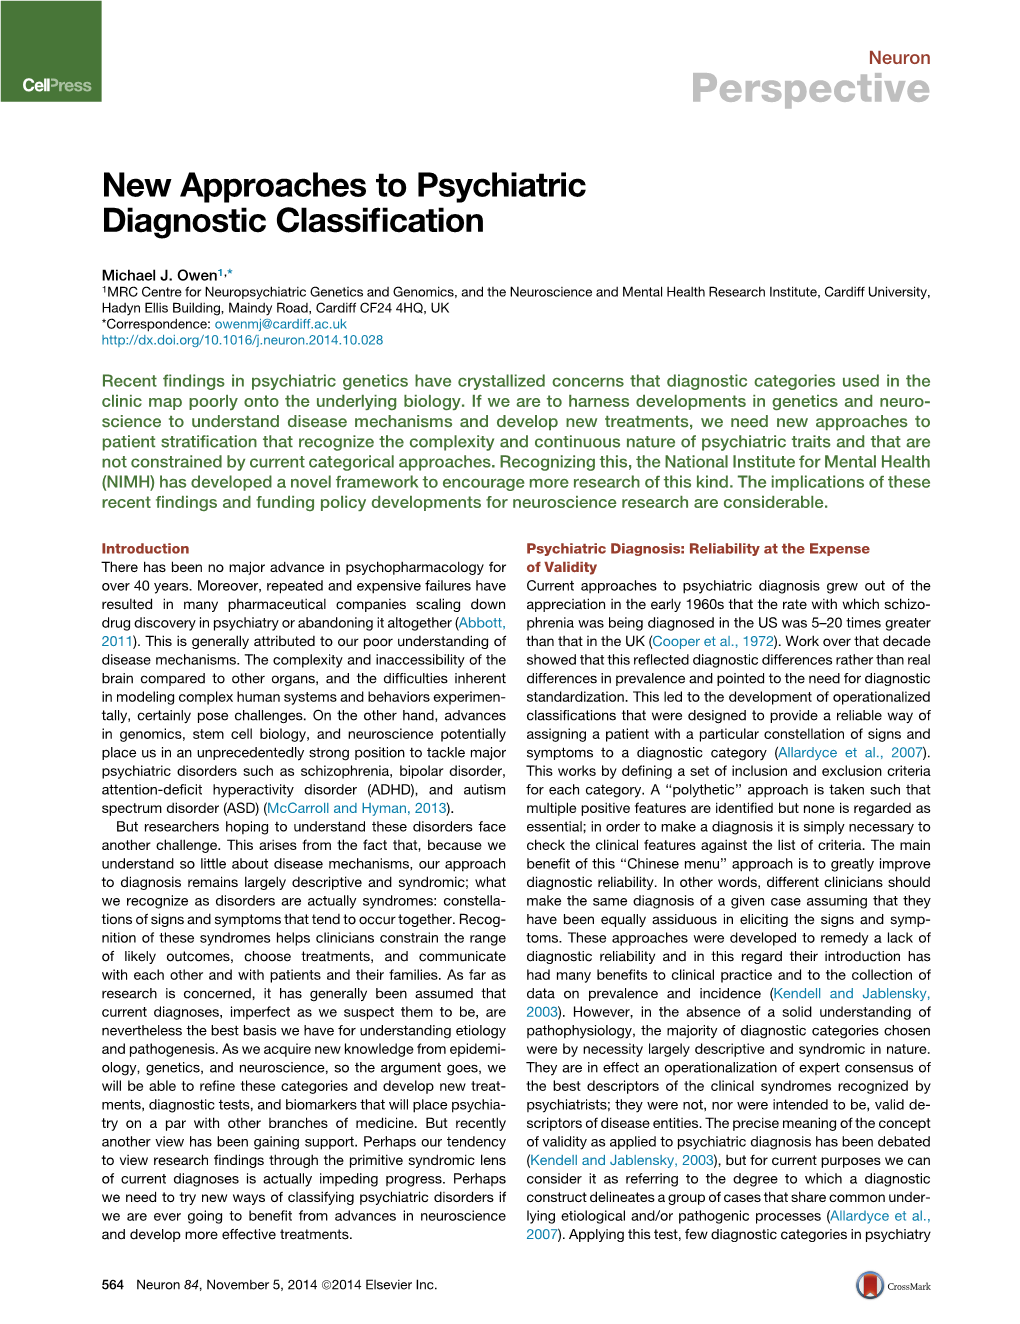 New Approaches to Psychiatric Diagnostic Classification